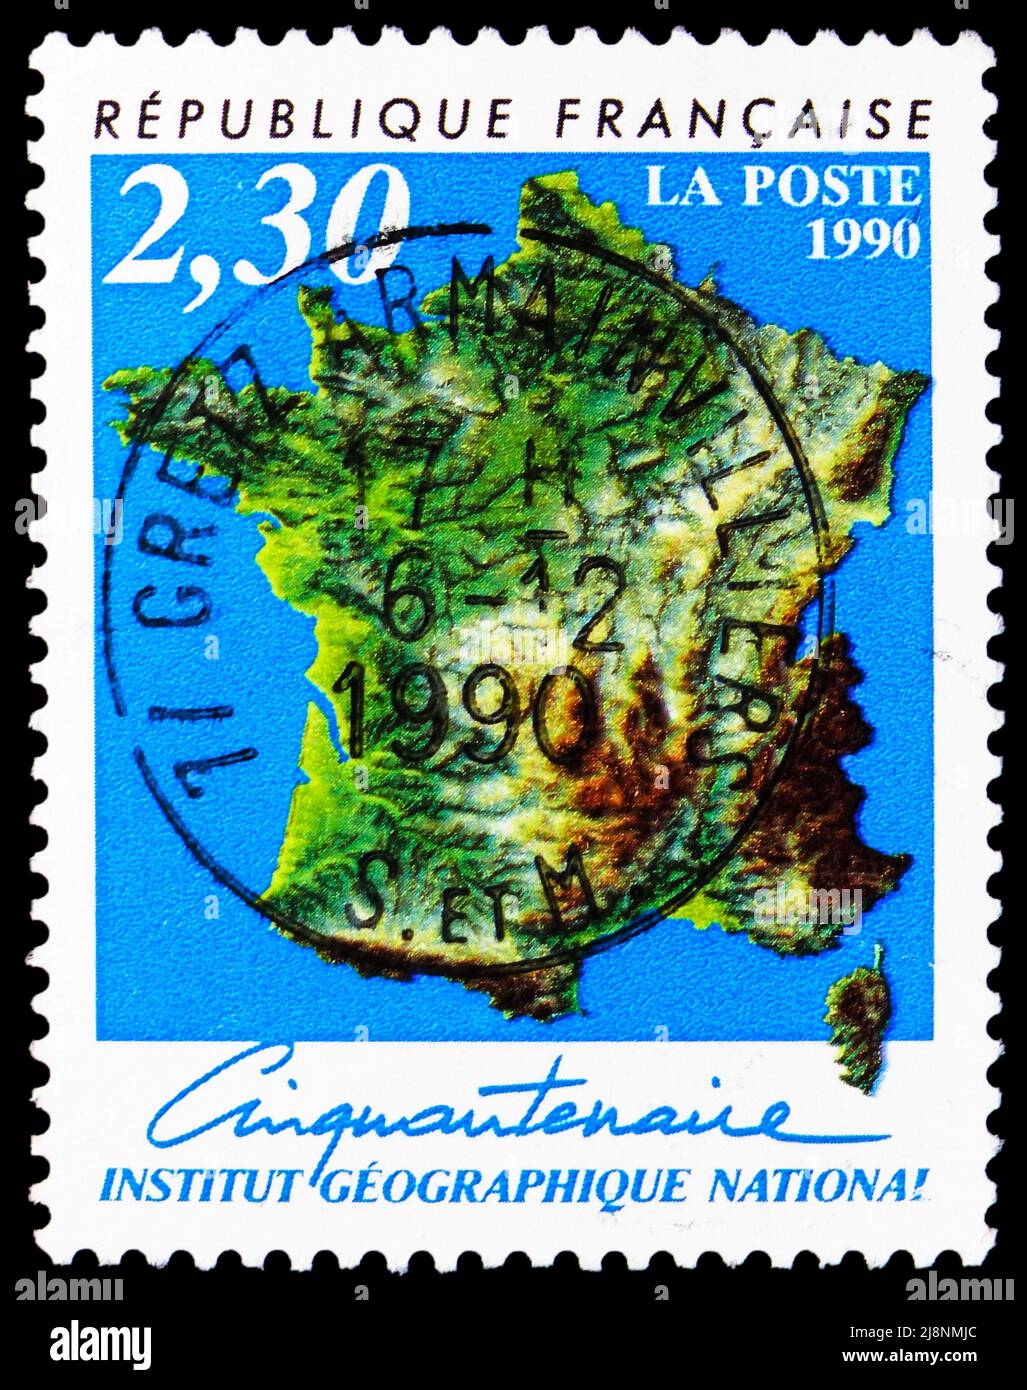 MOSCOW, RUSSIA - MAY 14, 2022: Postage stamp printed in France shows Fiftieth anniversary of the National Geographic Institute, circa 1990 Stock Photo